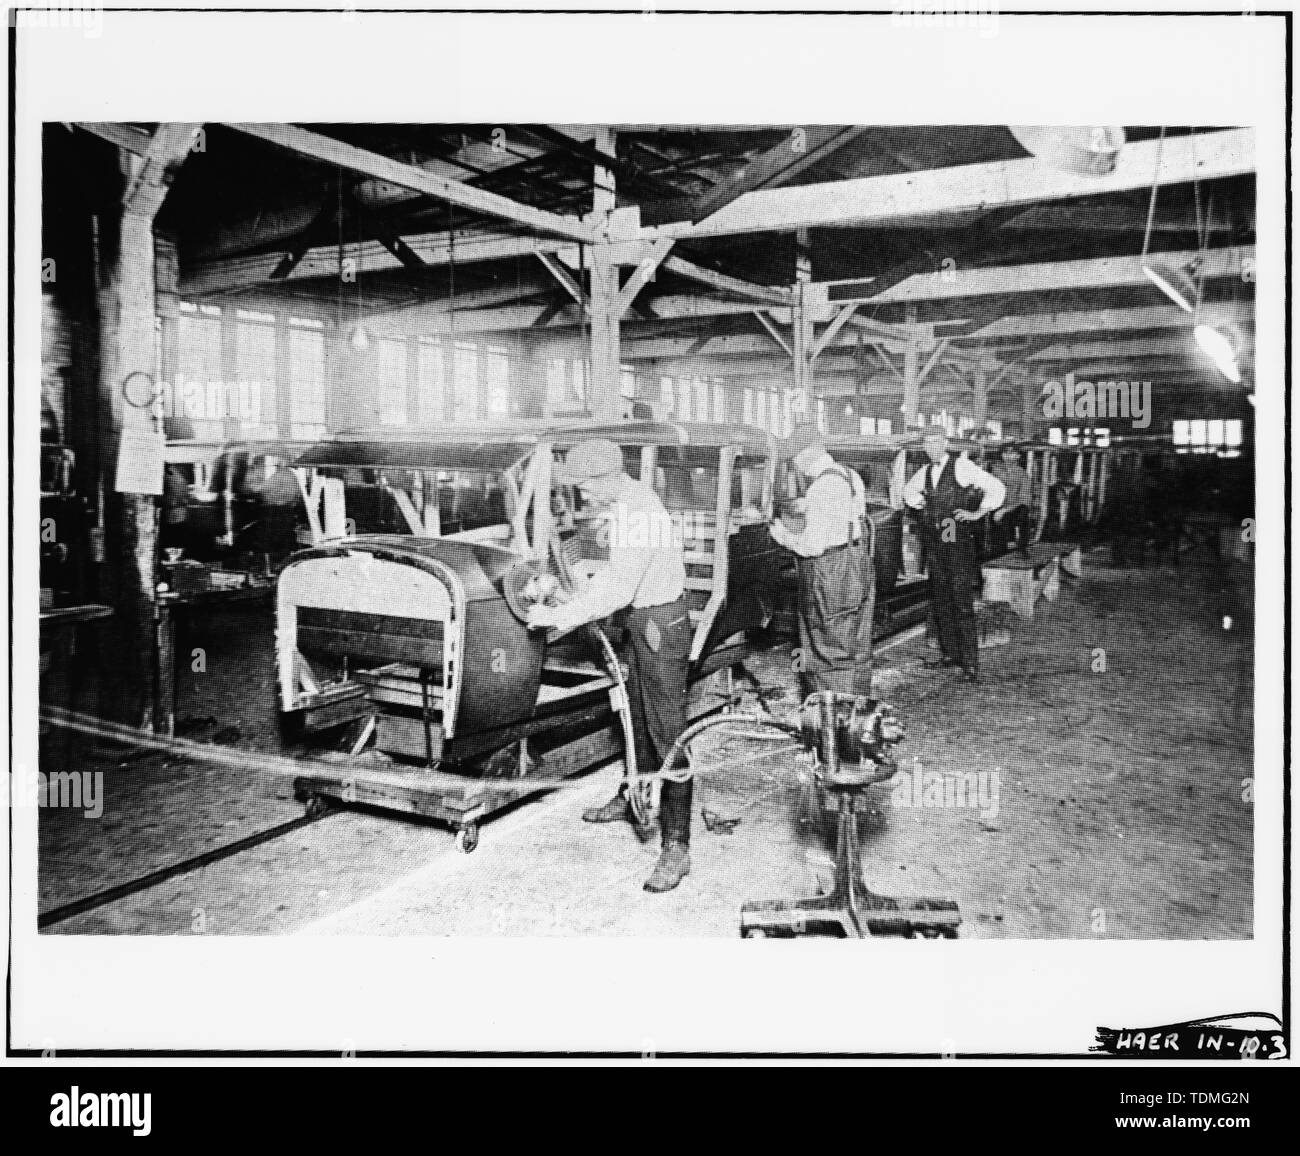 PHOTOCOPY OF PHOTO CA. 1906 SHOWING WOODEN AUTO BODIES ON ASSEMBLY LINE, FROM COLLECTION OF HENRY BLOMMEL, CONNERSVILLE, INDIANA - Central Manufacturing Company, Eighteenth Street, Connersville, Fayette County, IN; Ansted, Edward W; Ansted, William B; Rosenberg, Robert; Sackheim, Donald Stock Photo